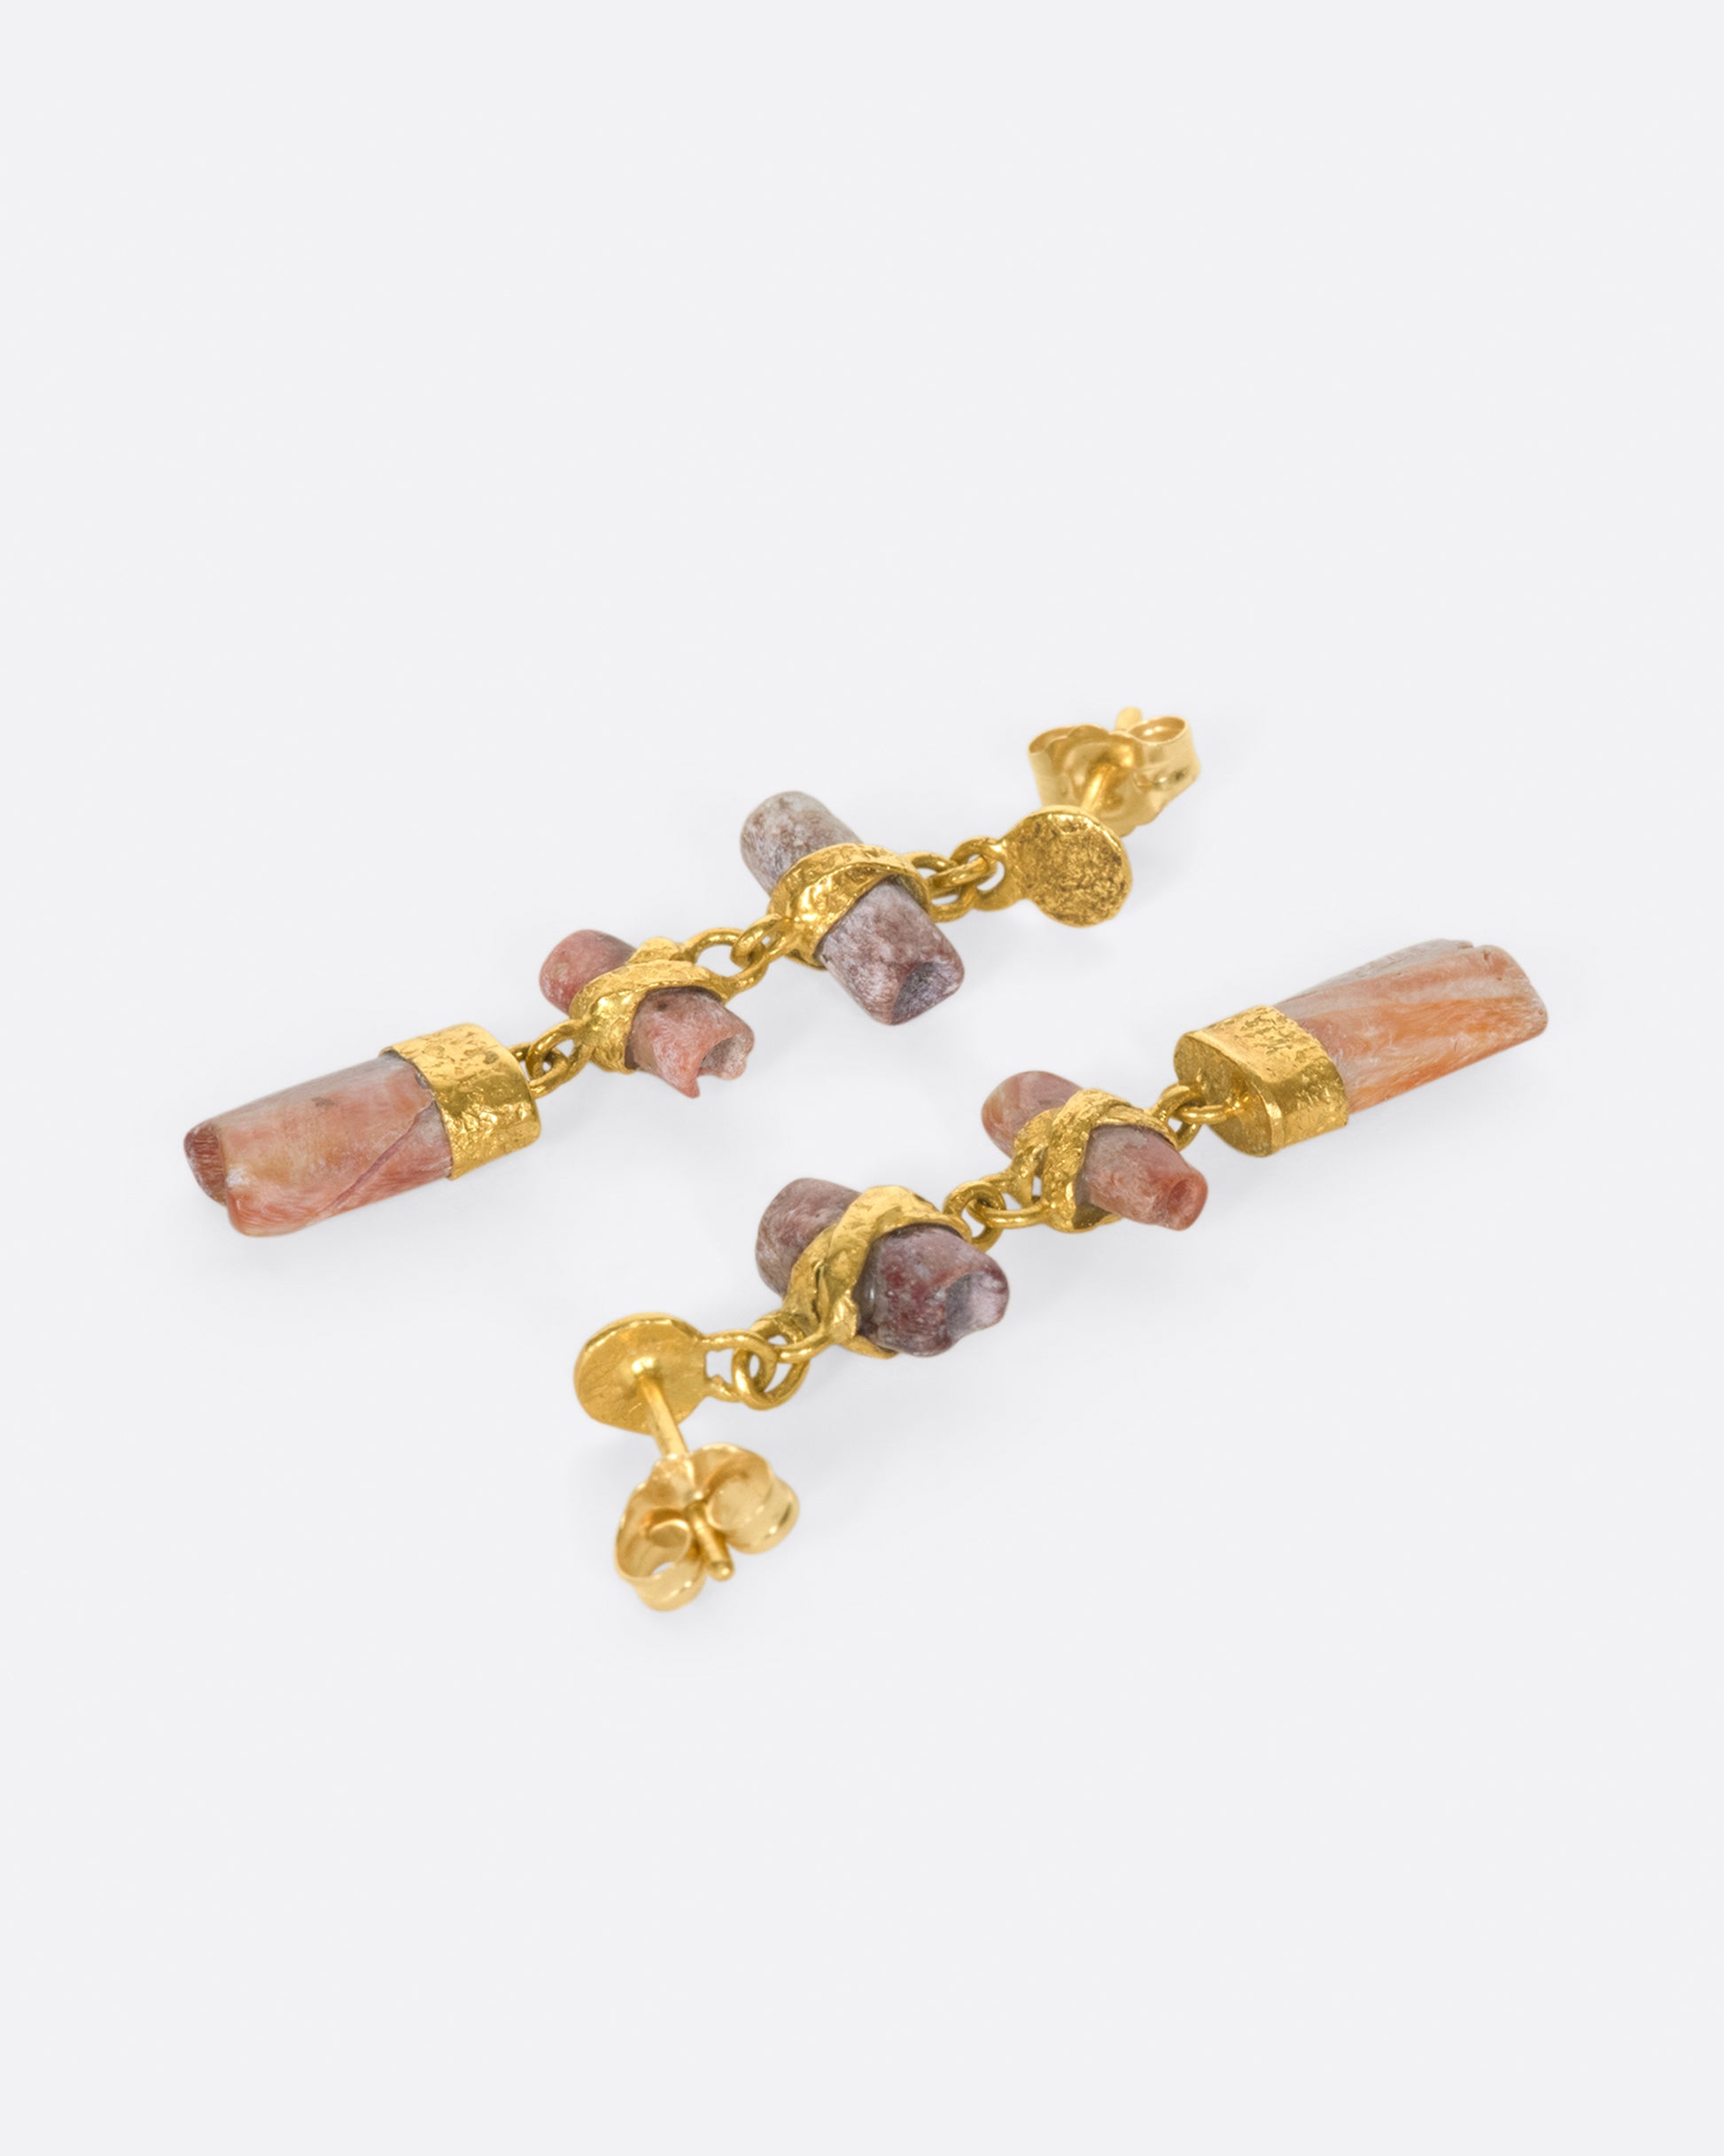 The high karat gold and peachy pink tones of these Pre-Colombian beads are a perfect match.